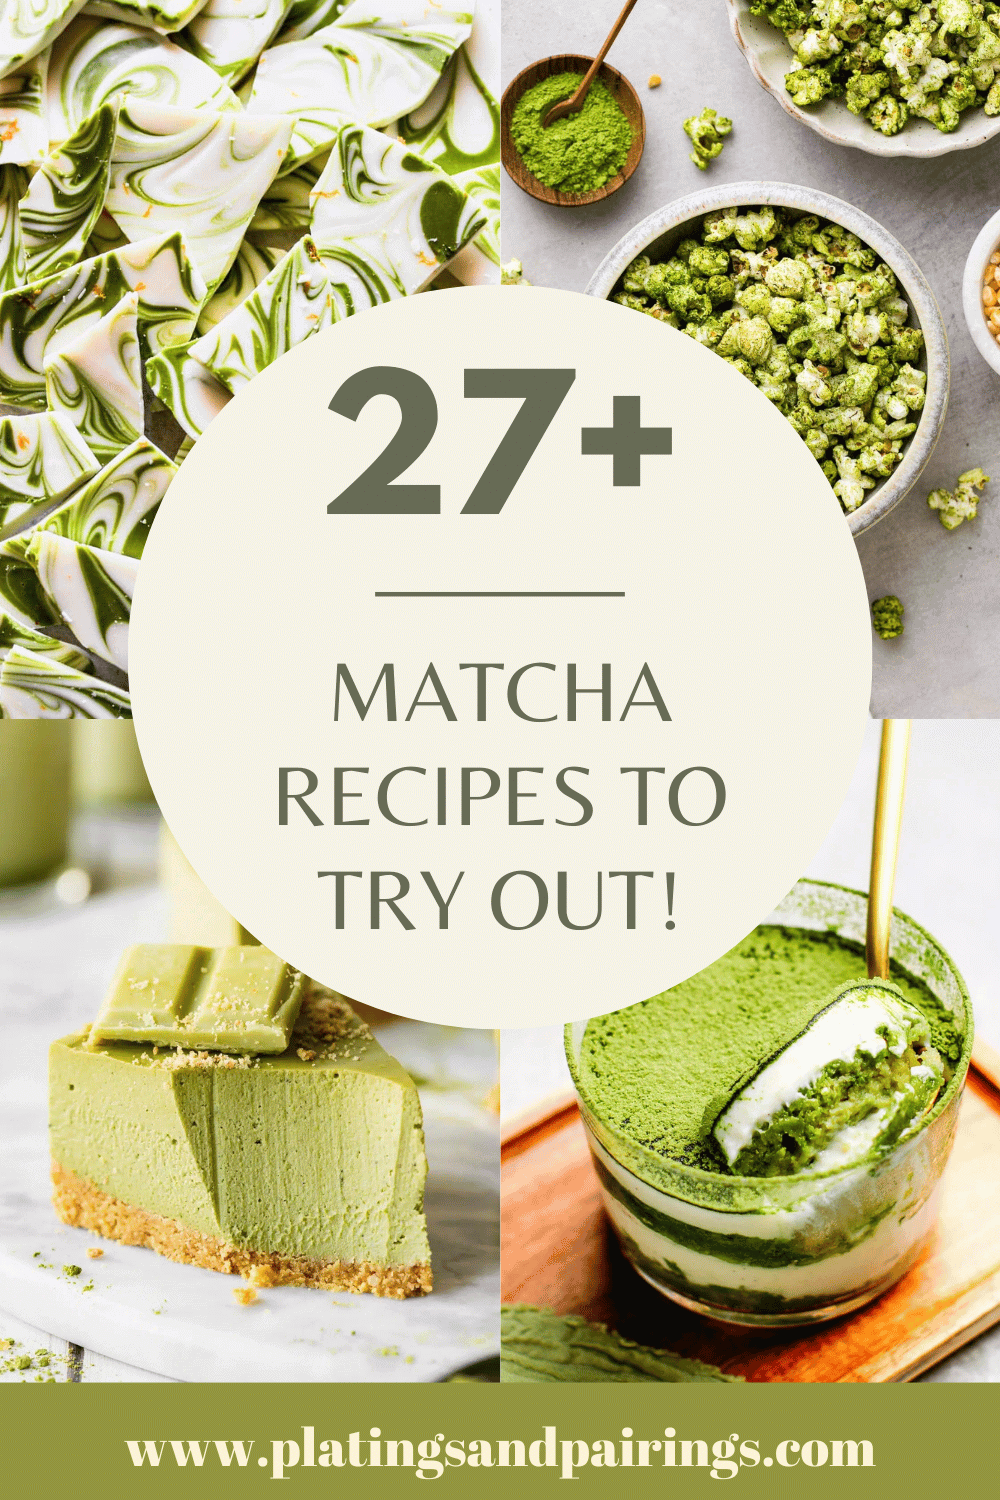 Collage of matcha recipes with text overlay.